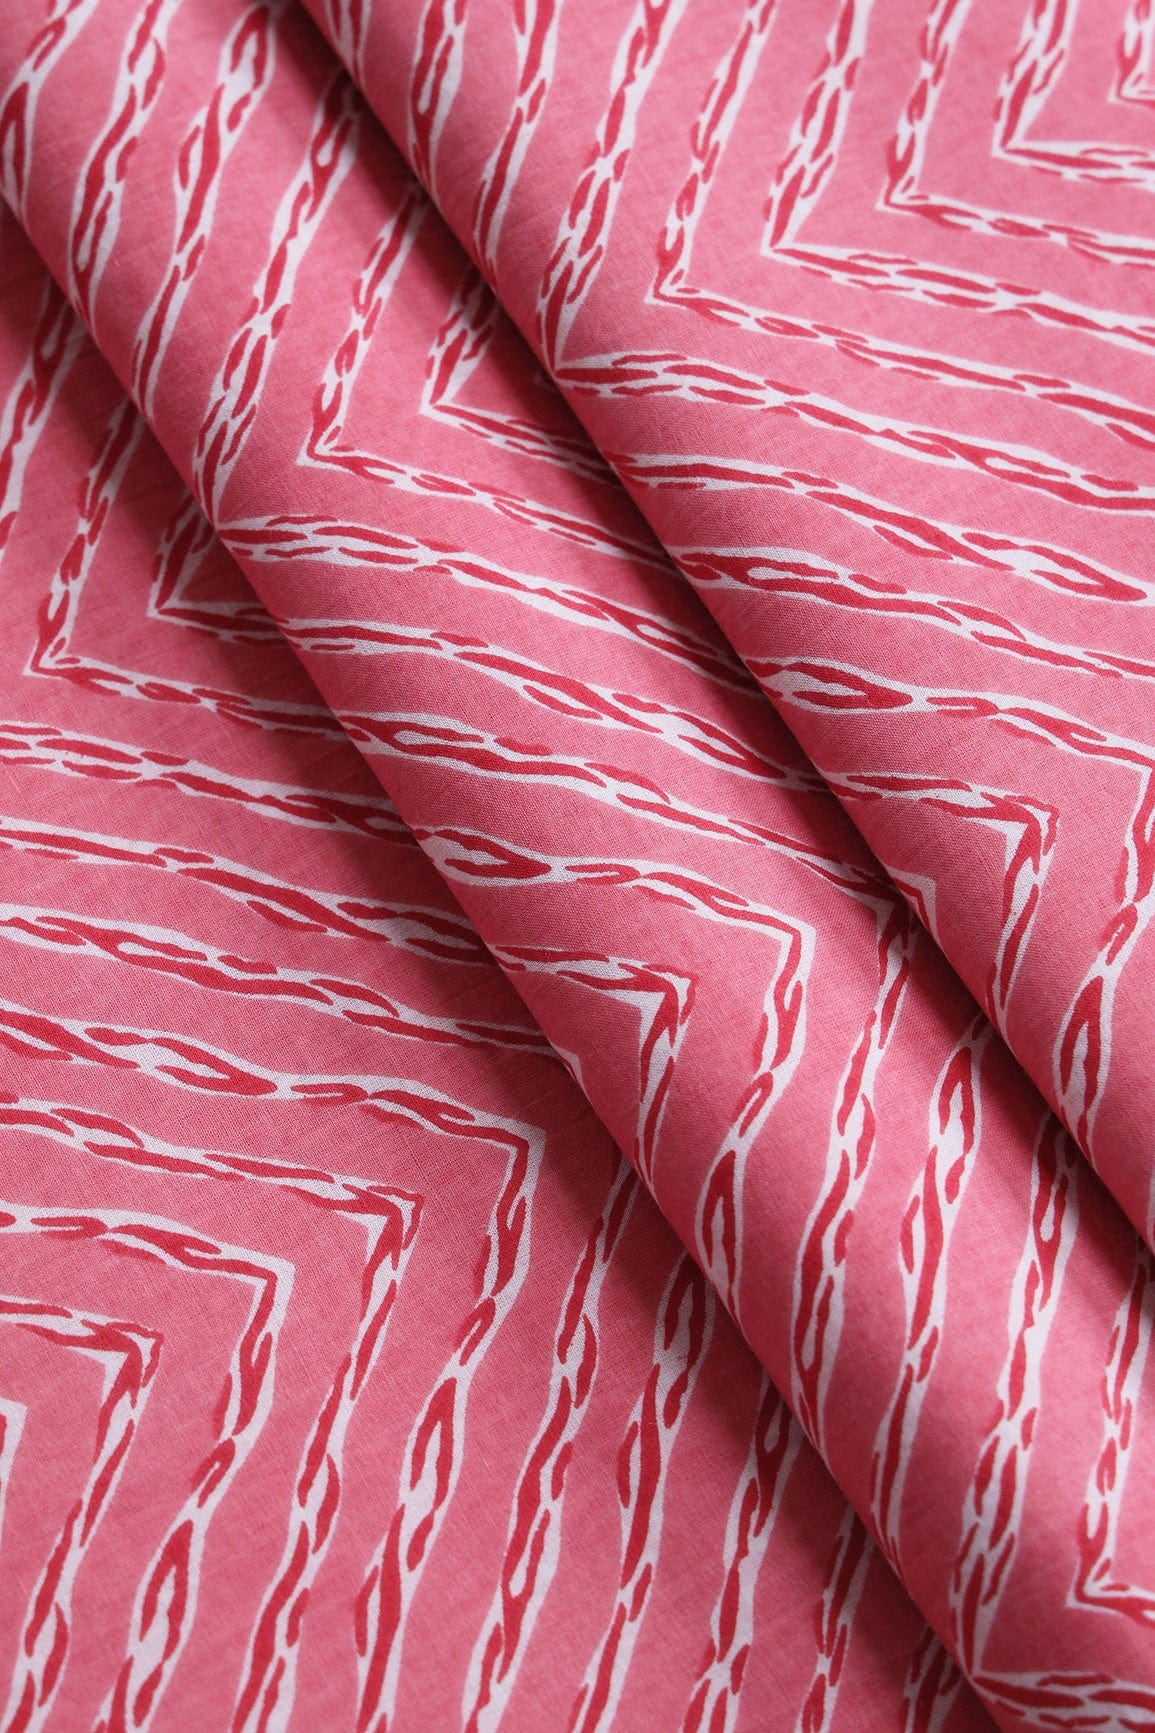 doeraa Prints Hot Pink And White Chevron Print On Pure Mul Cotton Fabric